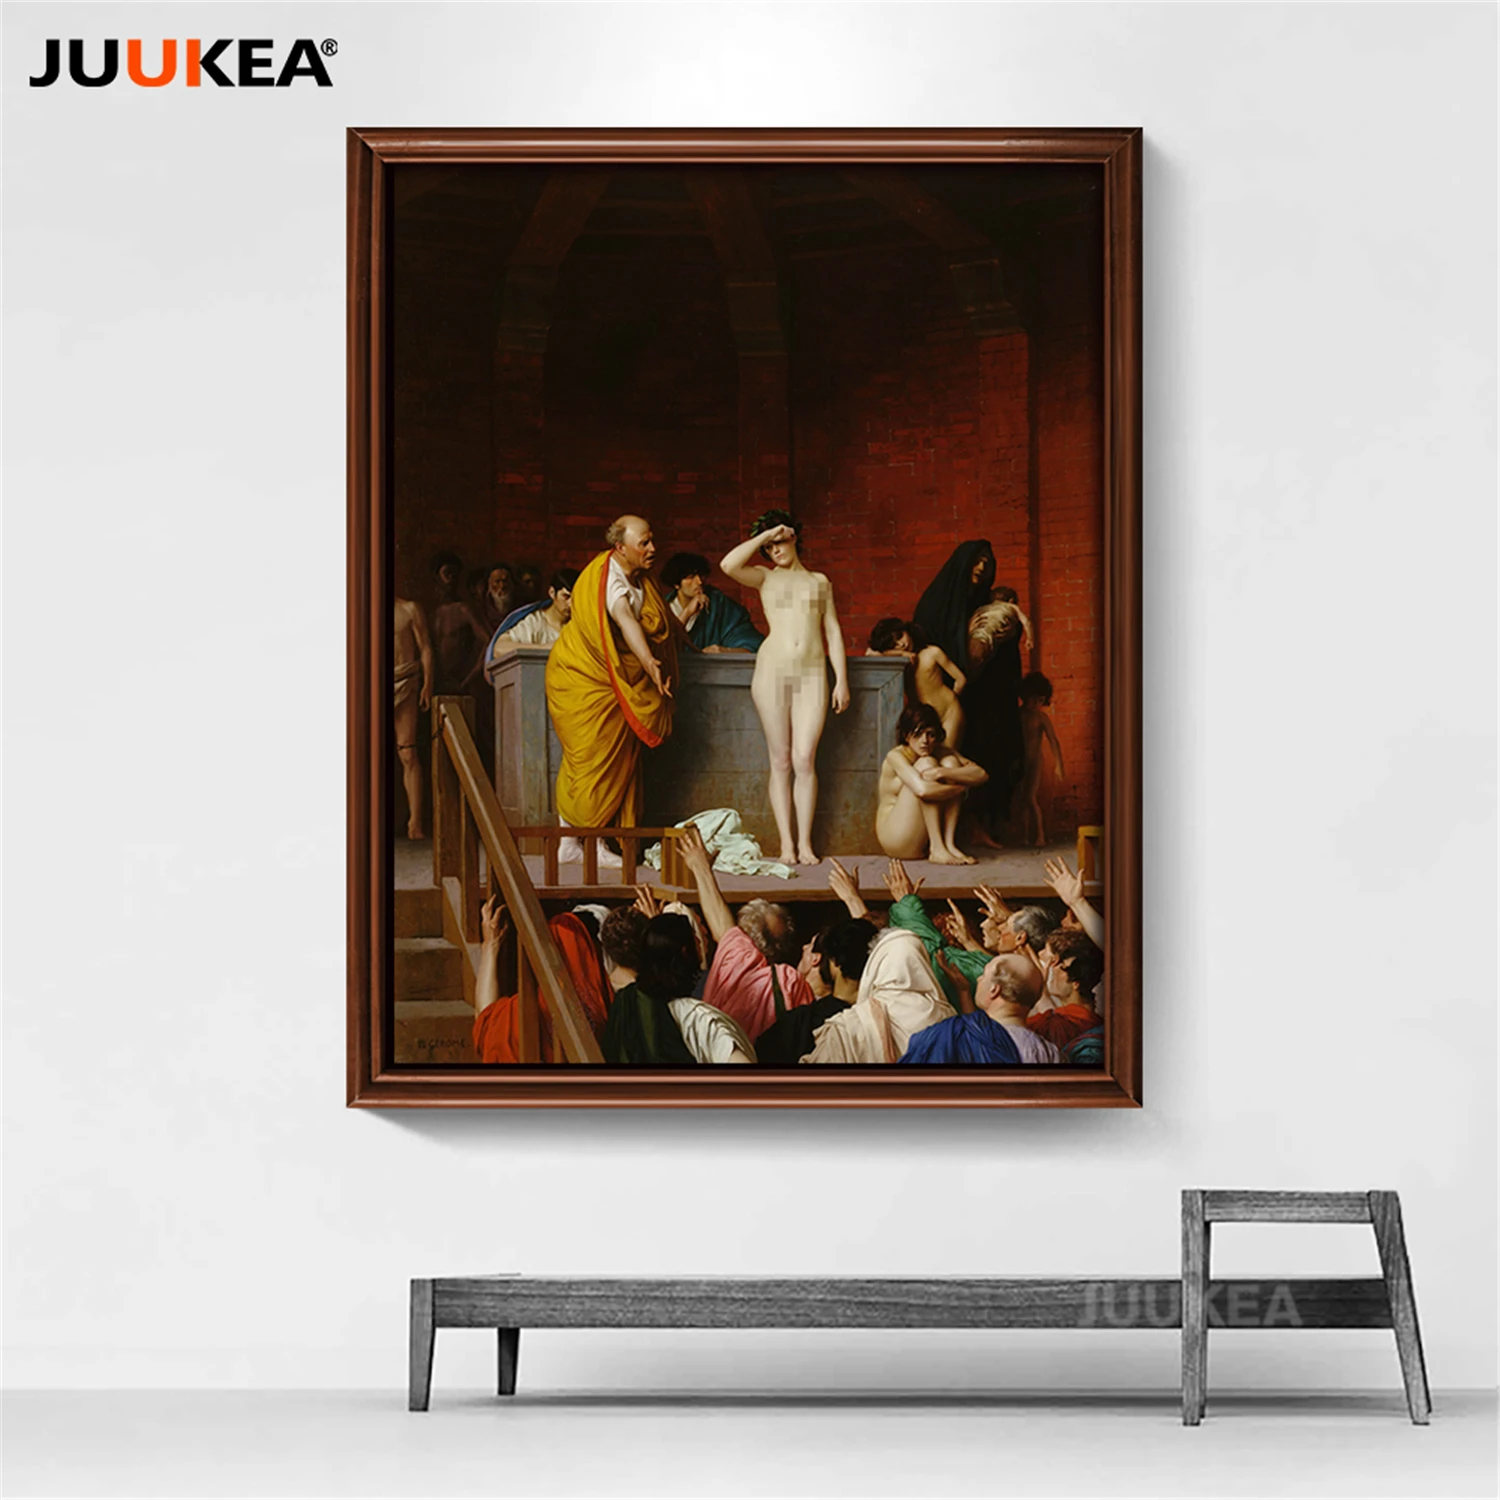 Jean Leon Gerome Slave Market Painting Large Wall Art Print 18X24 In 